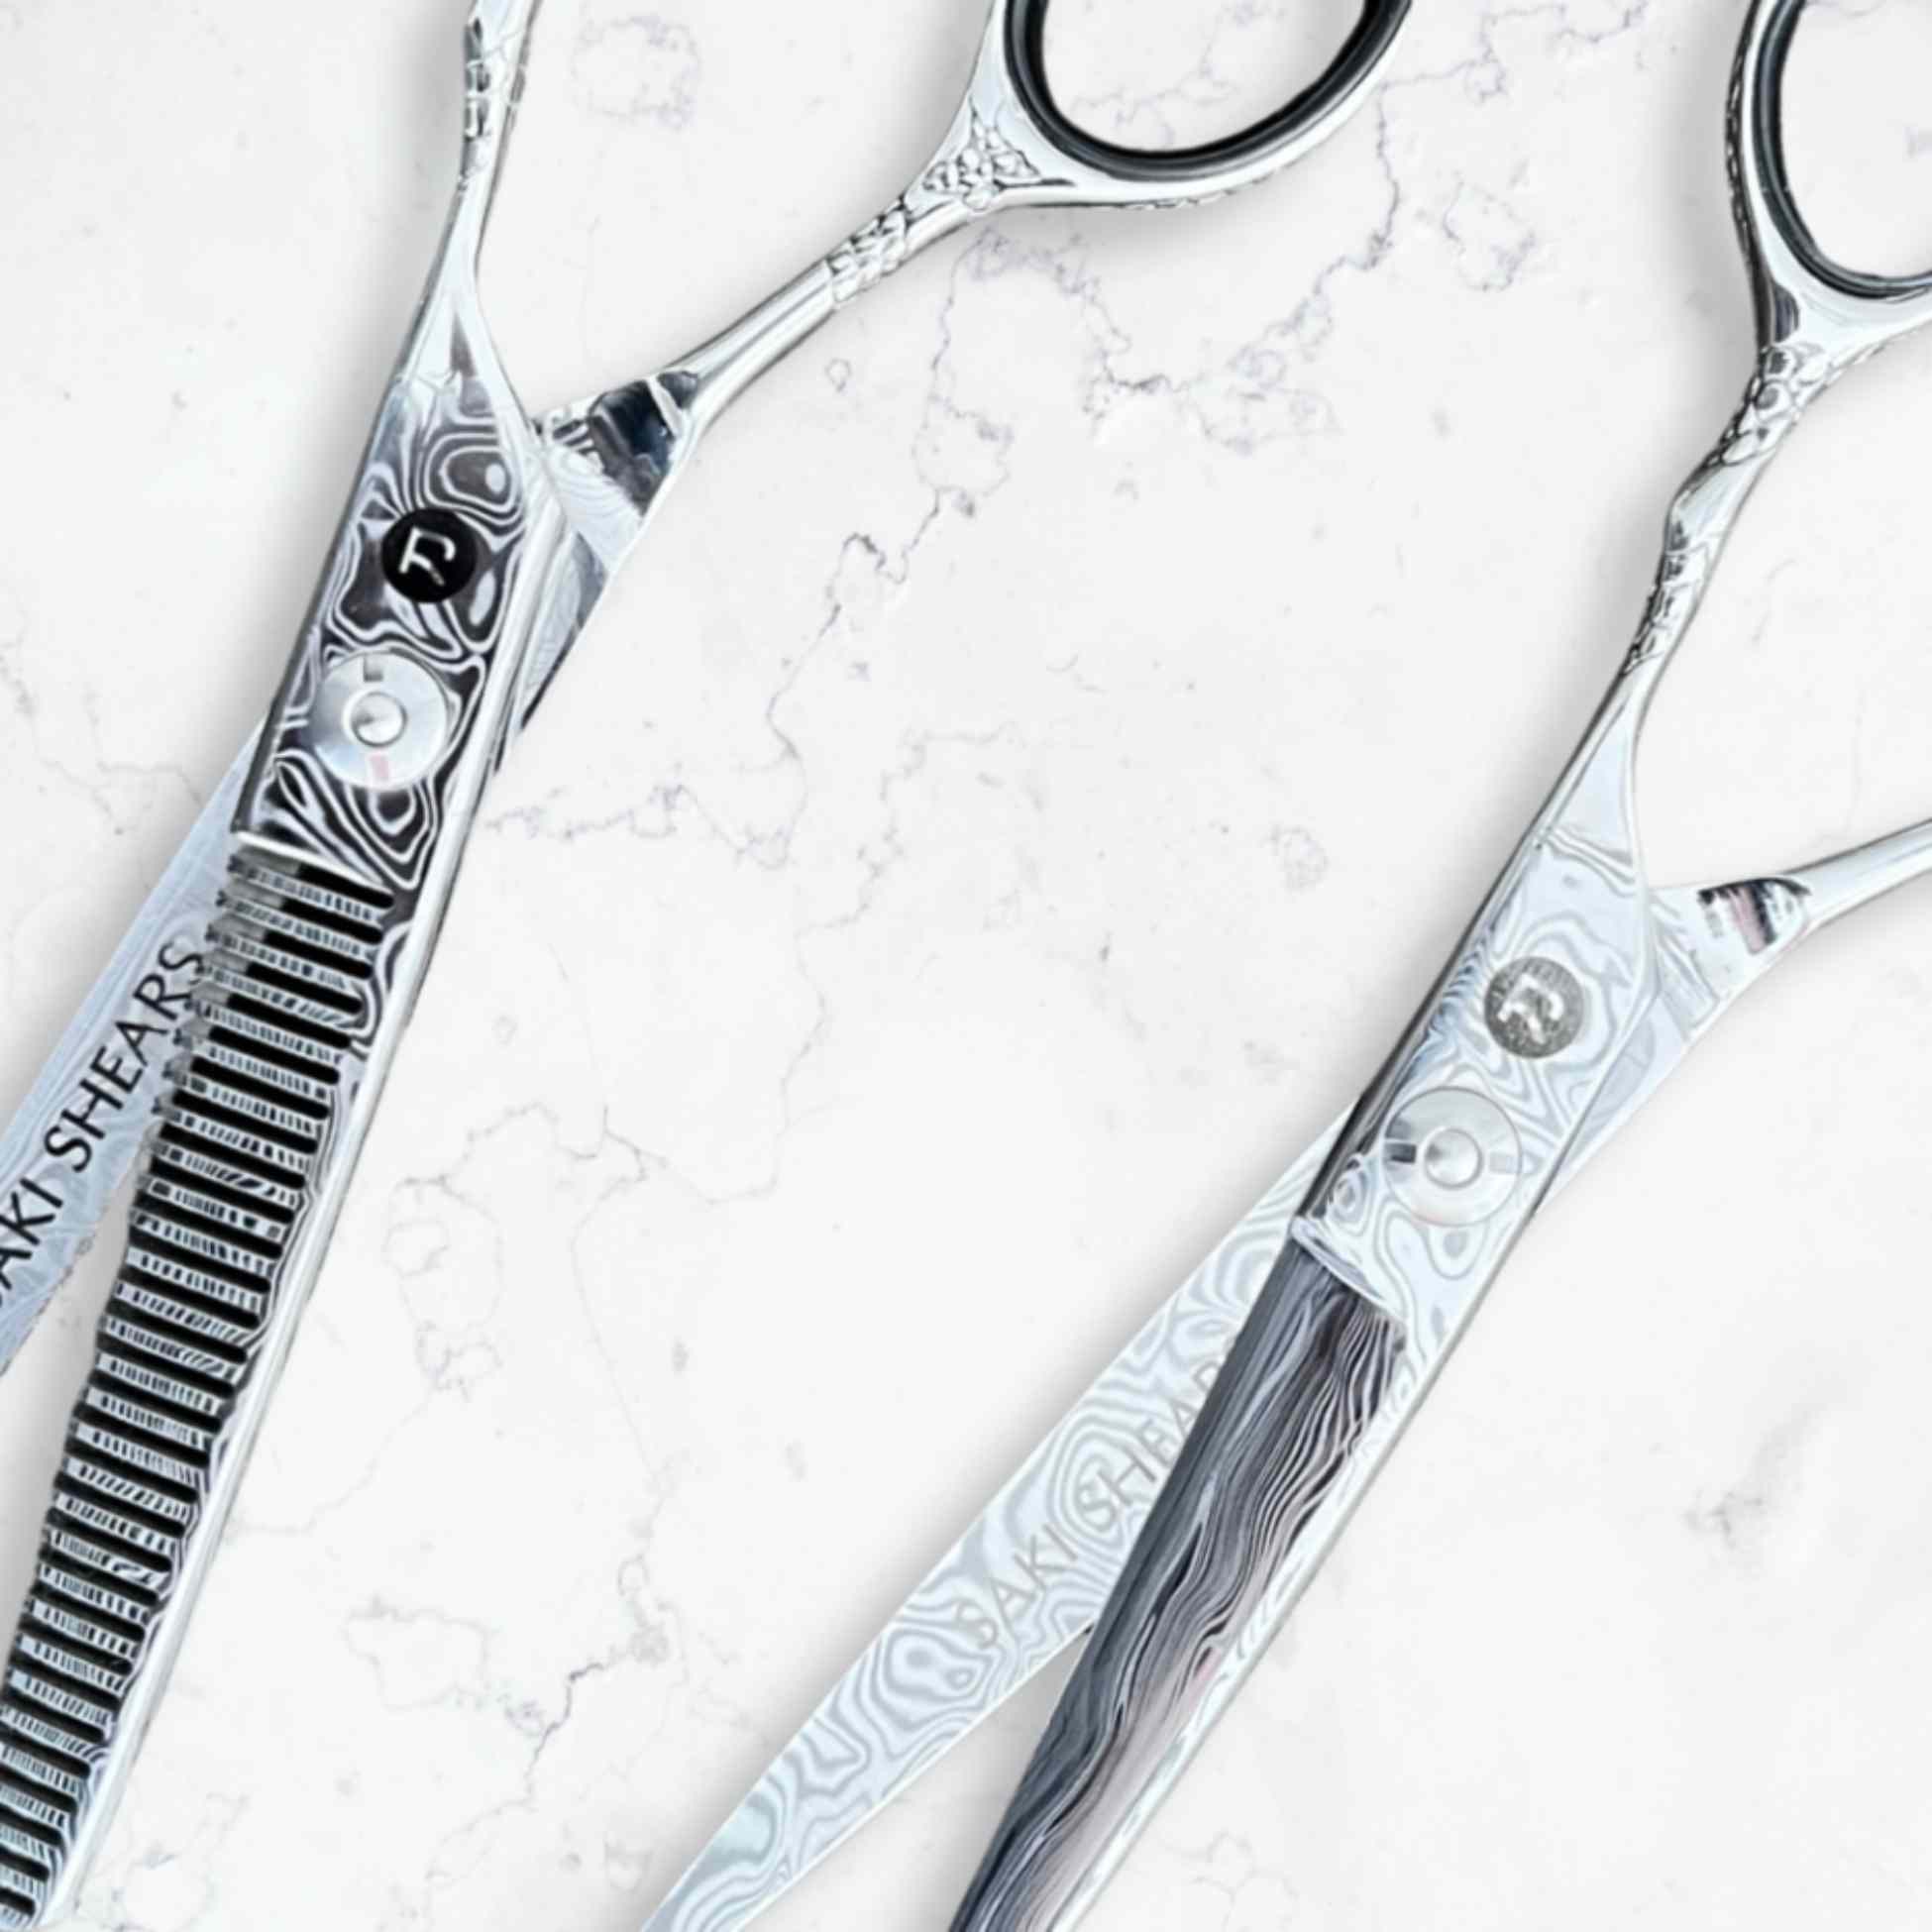 The Best Hair Shears of 2023: Expert Reviews and Recommendations